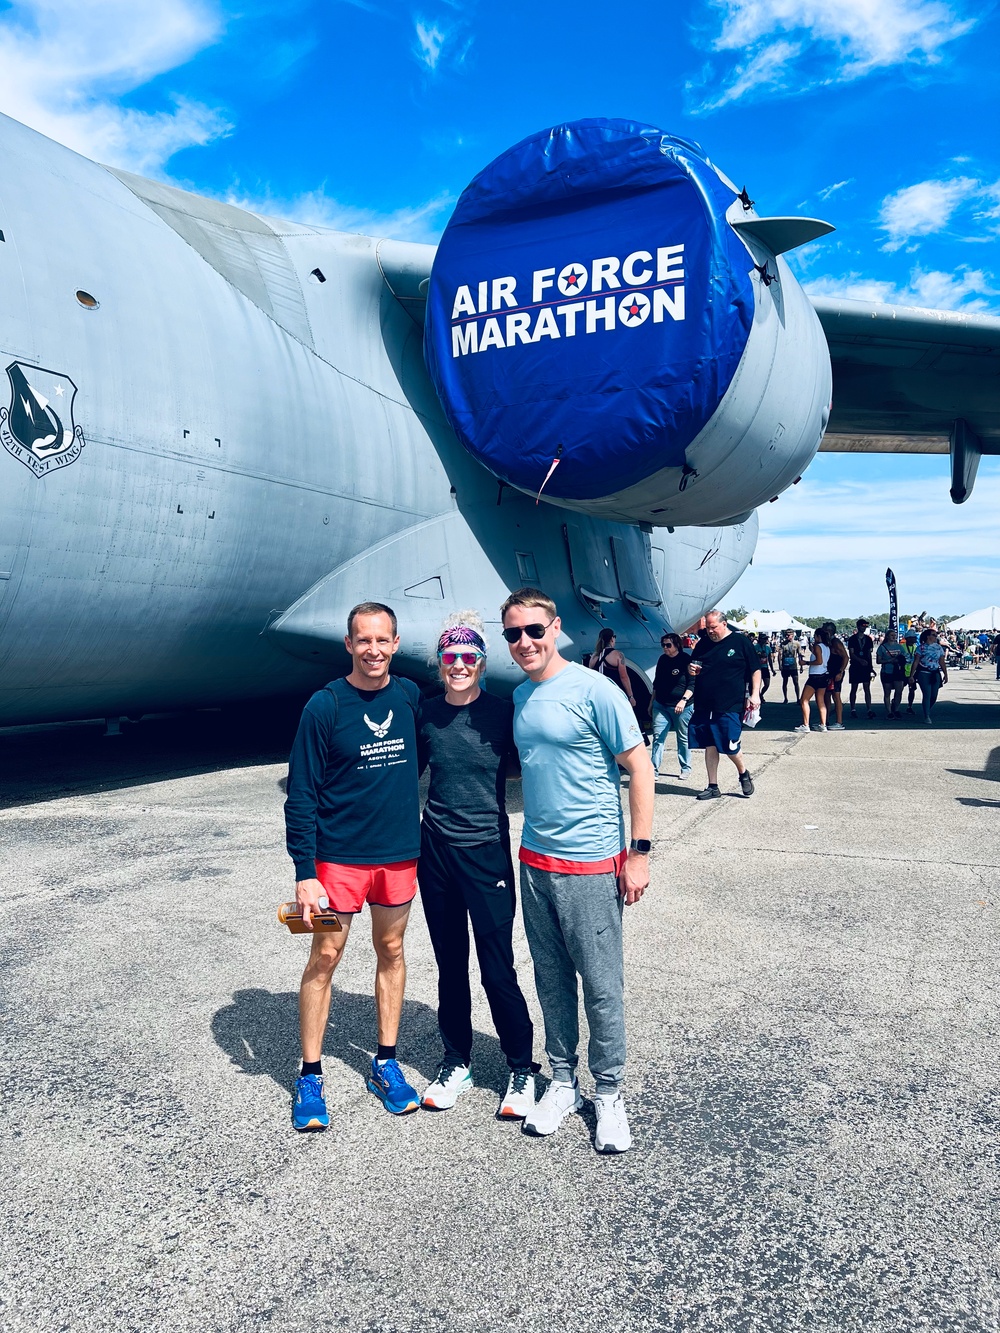 340th FTG, 559th FTS team finish first in AF Marathon 3-person relay